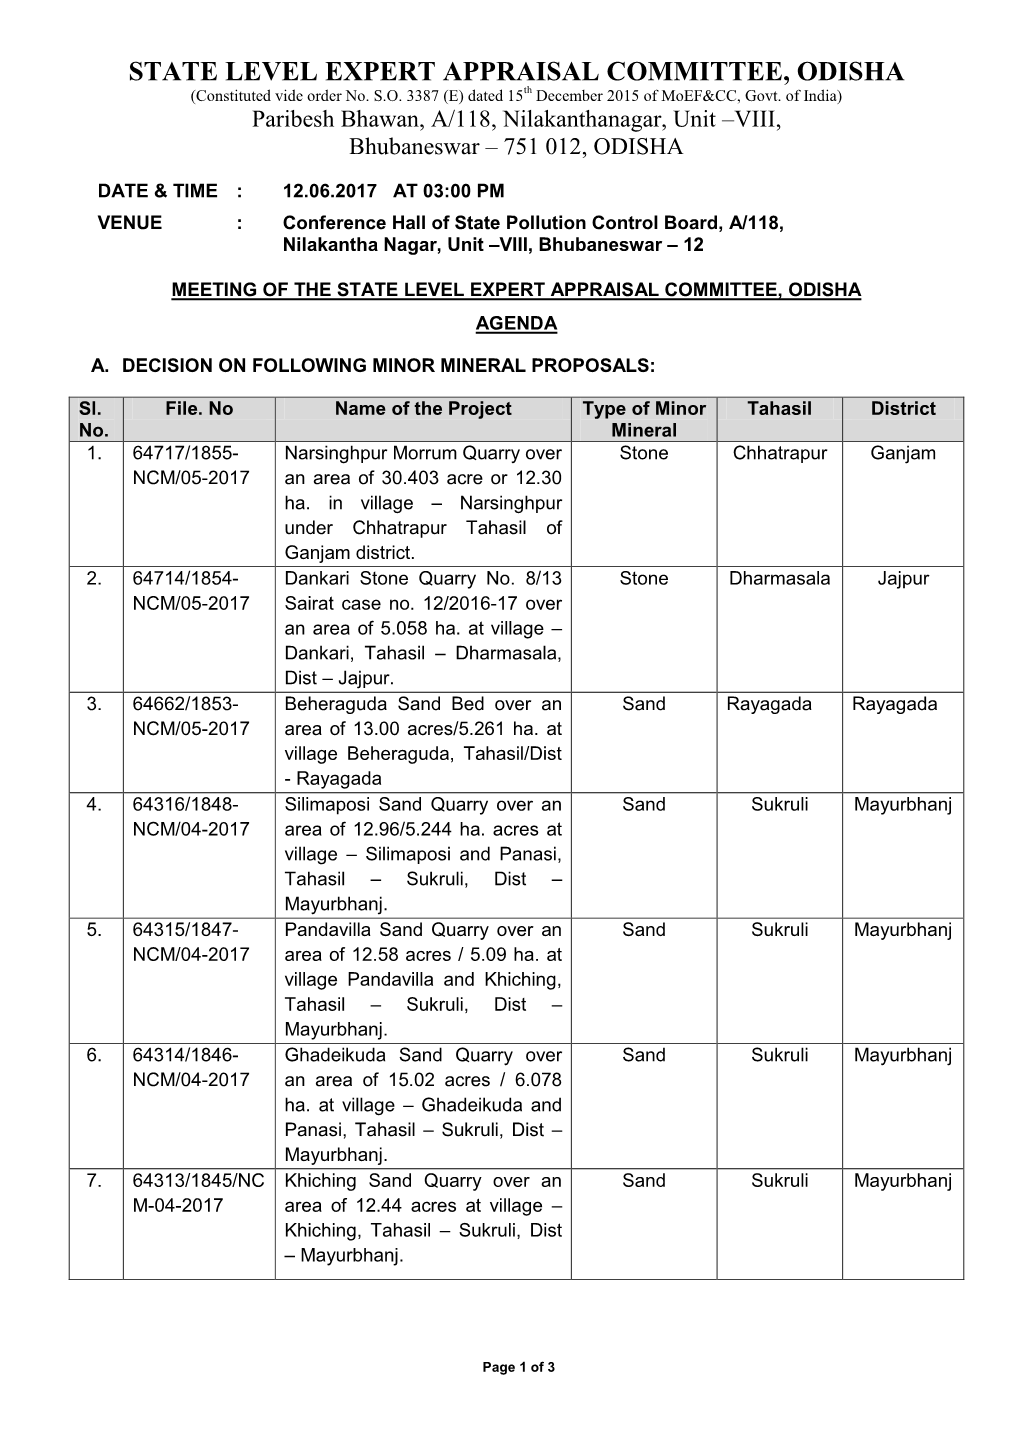 STATE LEVEL EXPERT APPRAISAL COMMITTEE, ODISHA (Constituted Vide Order No